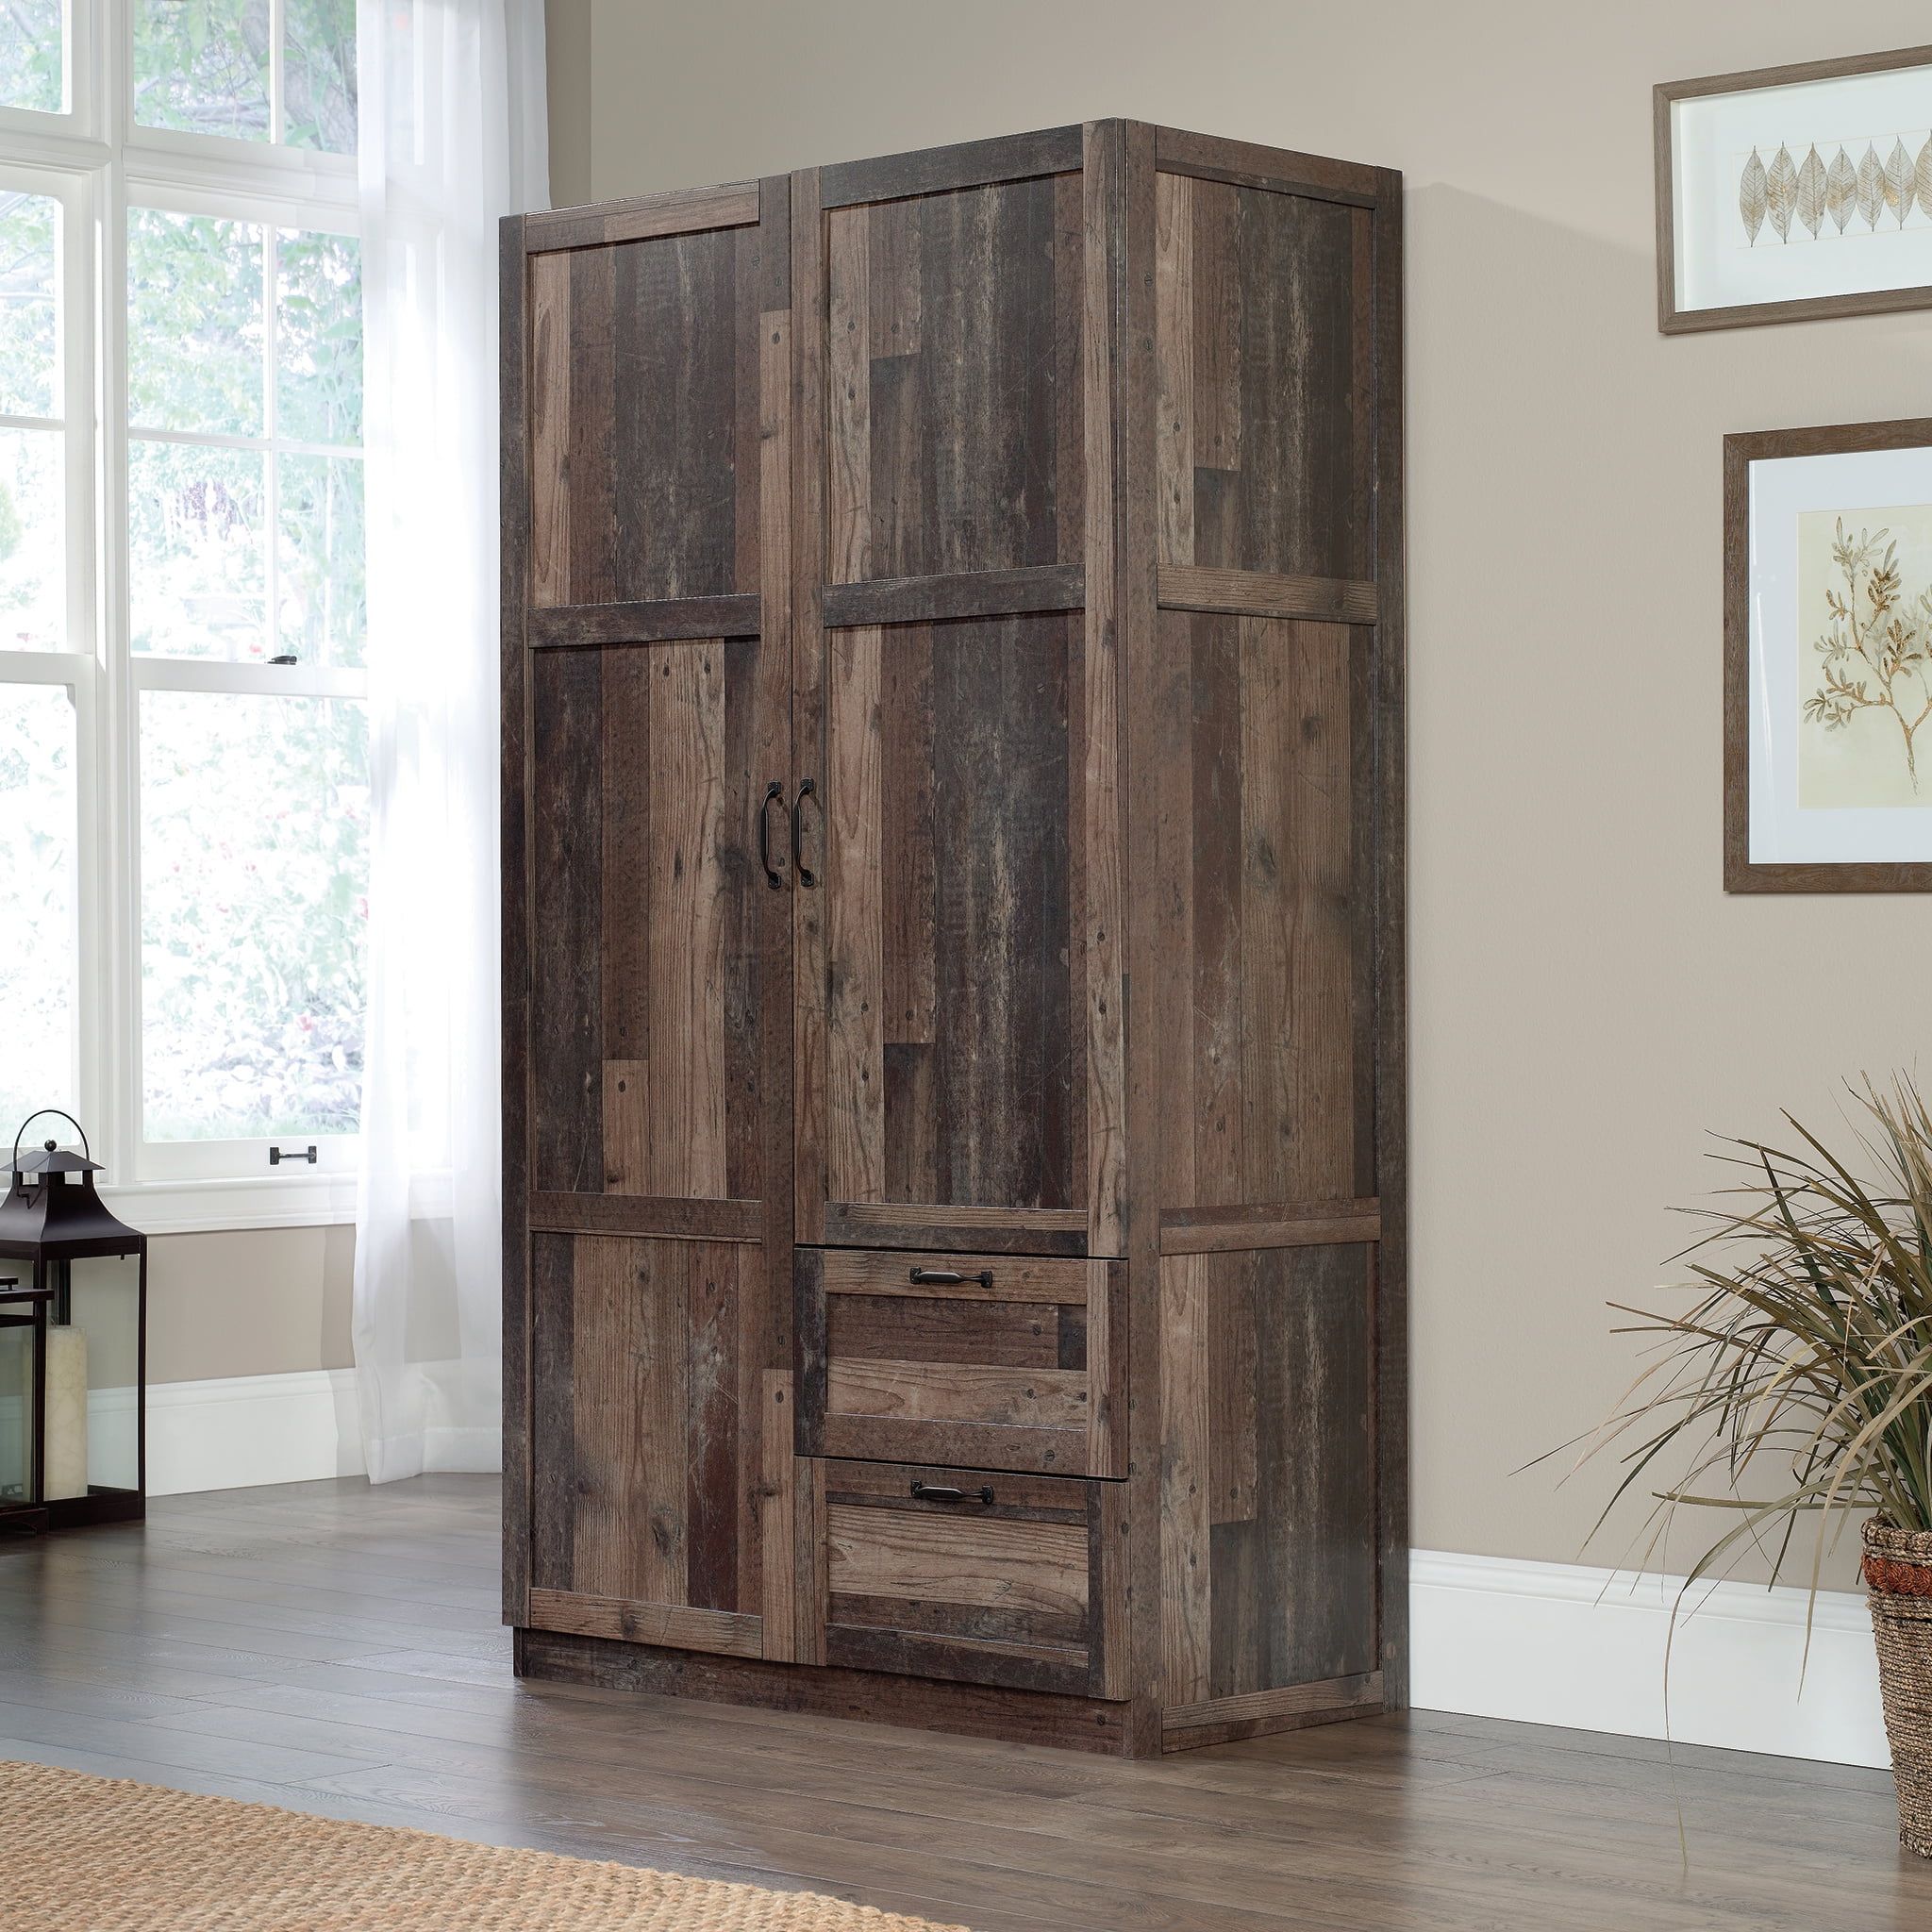 Sauder Select 40" Wide Wardrobe Storage Cabinet, Reclaimed Pine Finish –  Walmart Throughout Single Pine Wardrobes With Drawers (View 15 of 15)